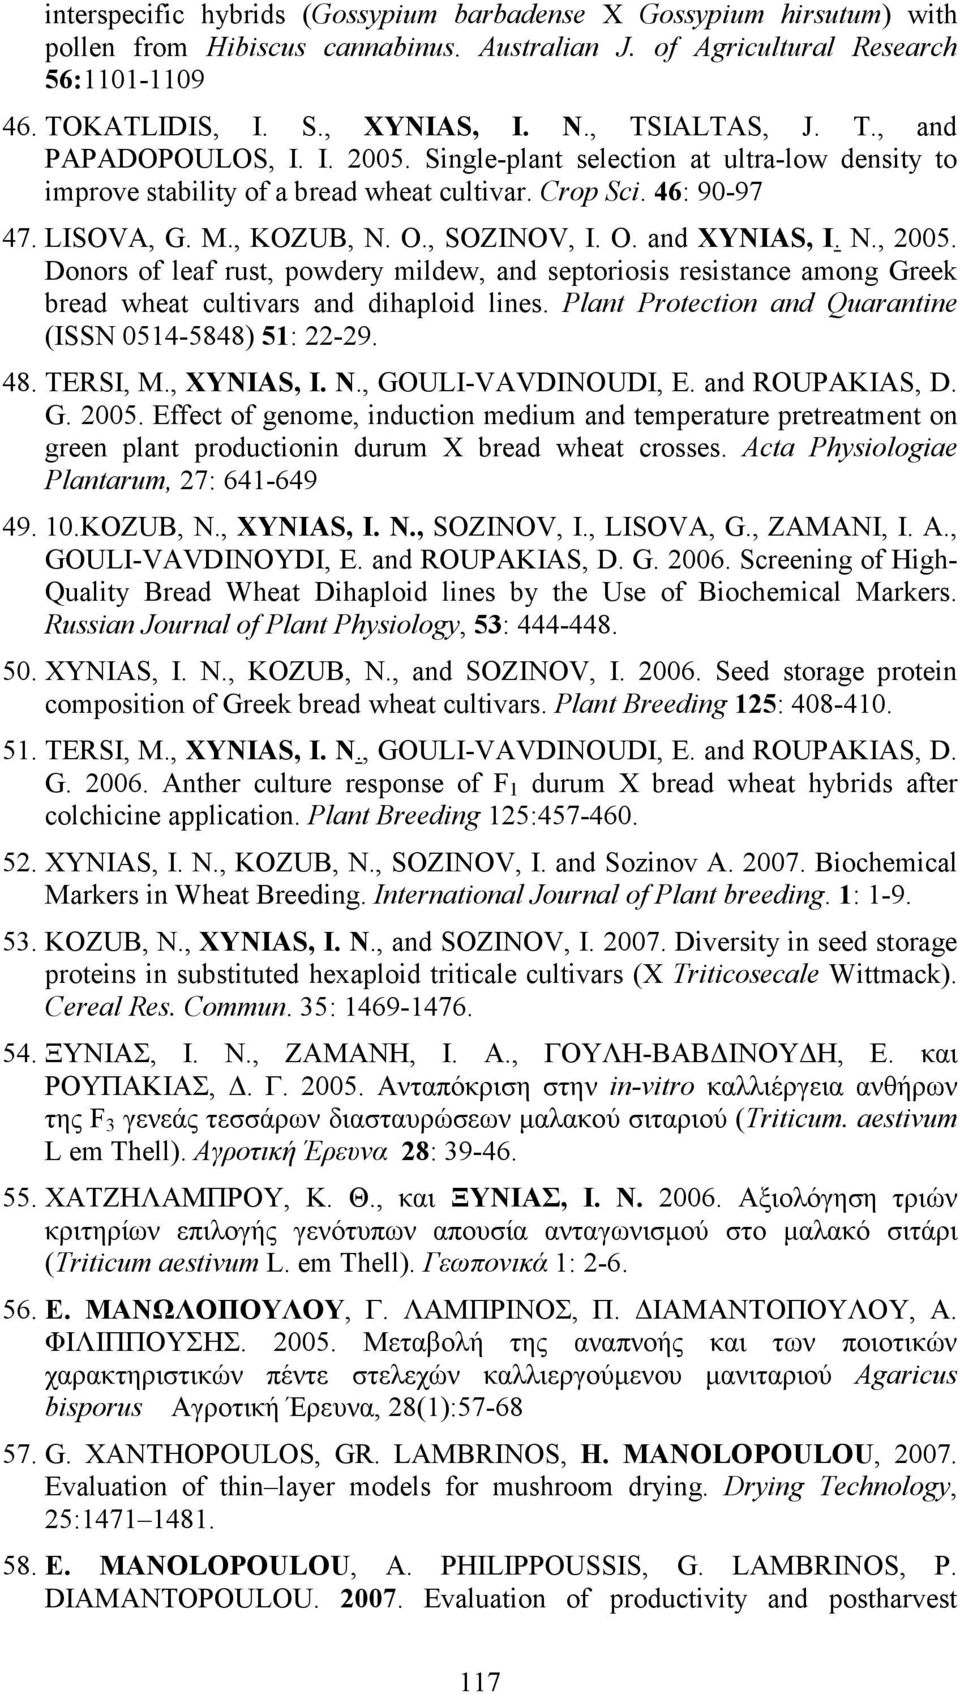 , SOZINOV, I. O. and XYNIAS, I. N., 2005. Donors of leaf rust, powdery mildew, and septoriosis resistance among Greek bread wheat cultivars and dihaploid lines.